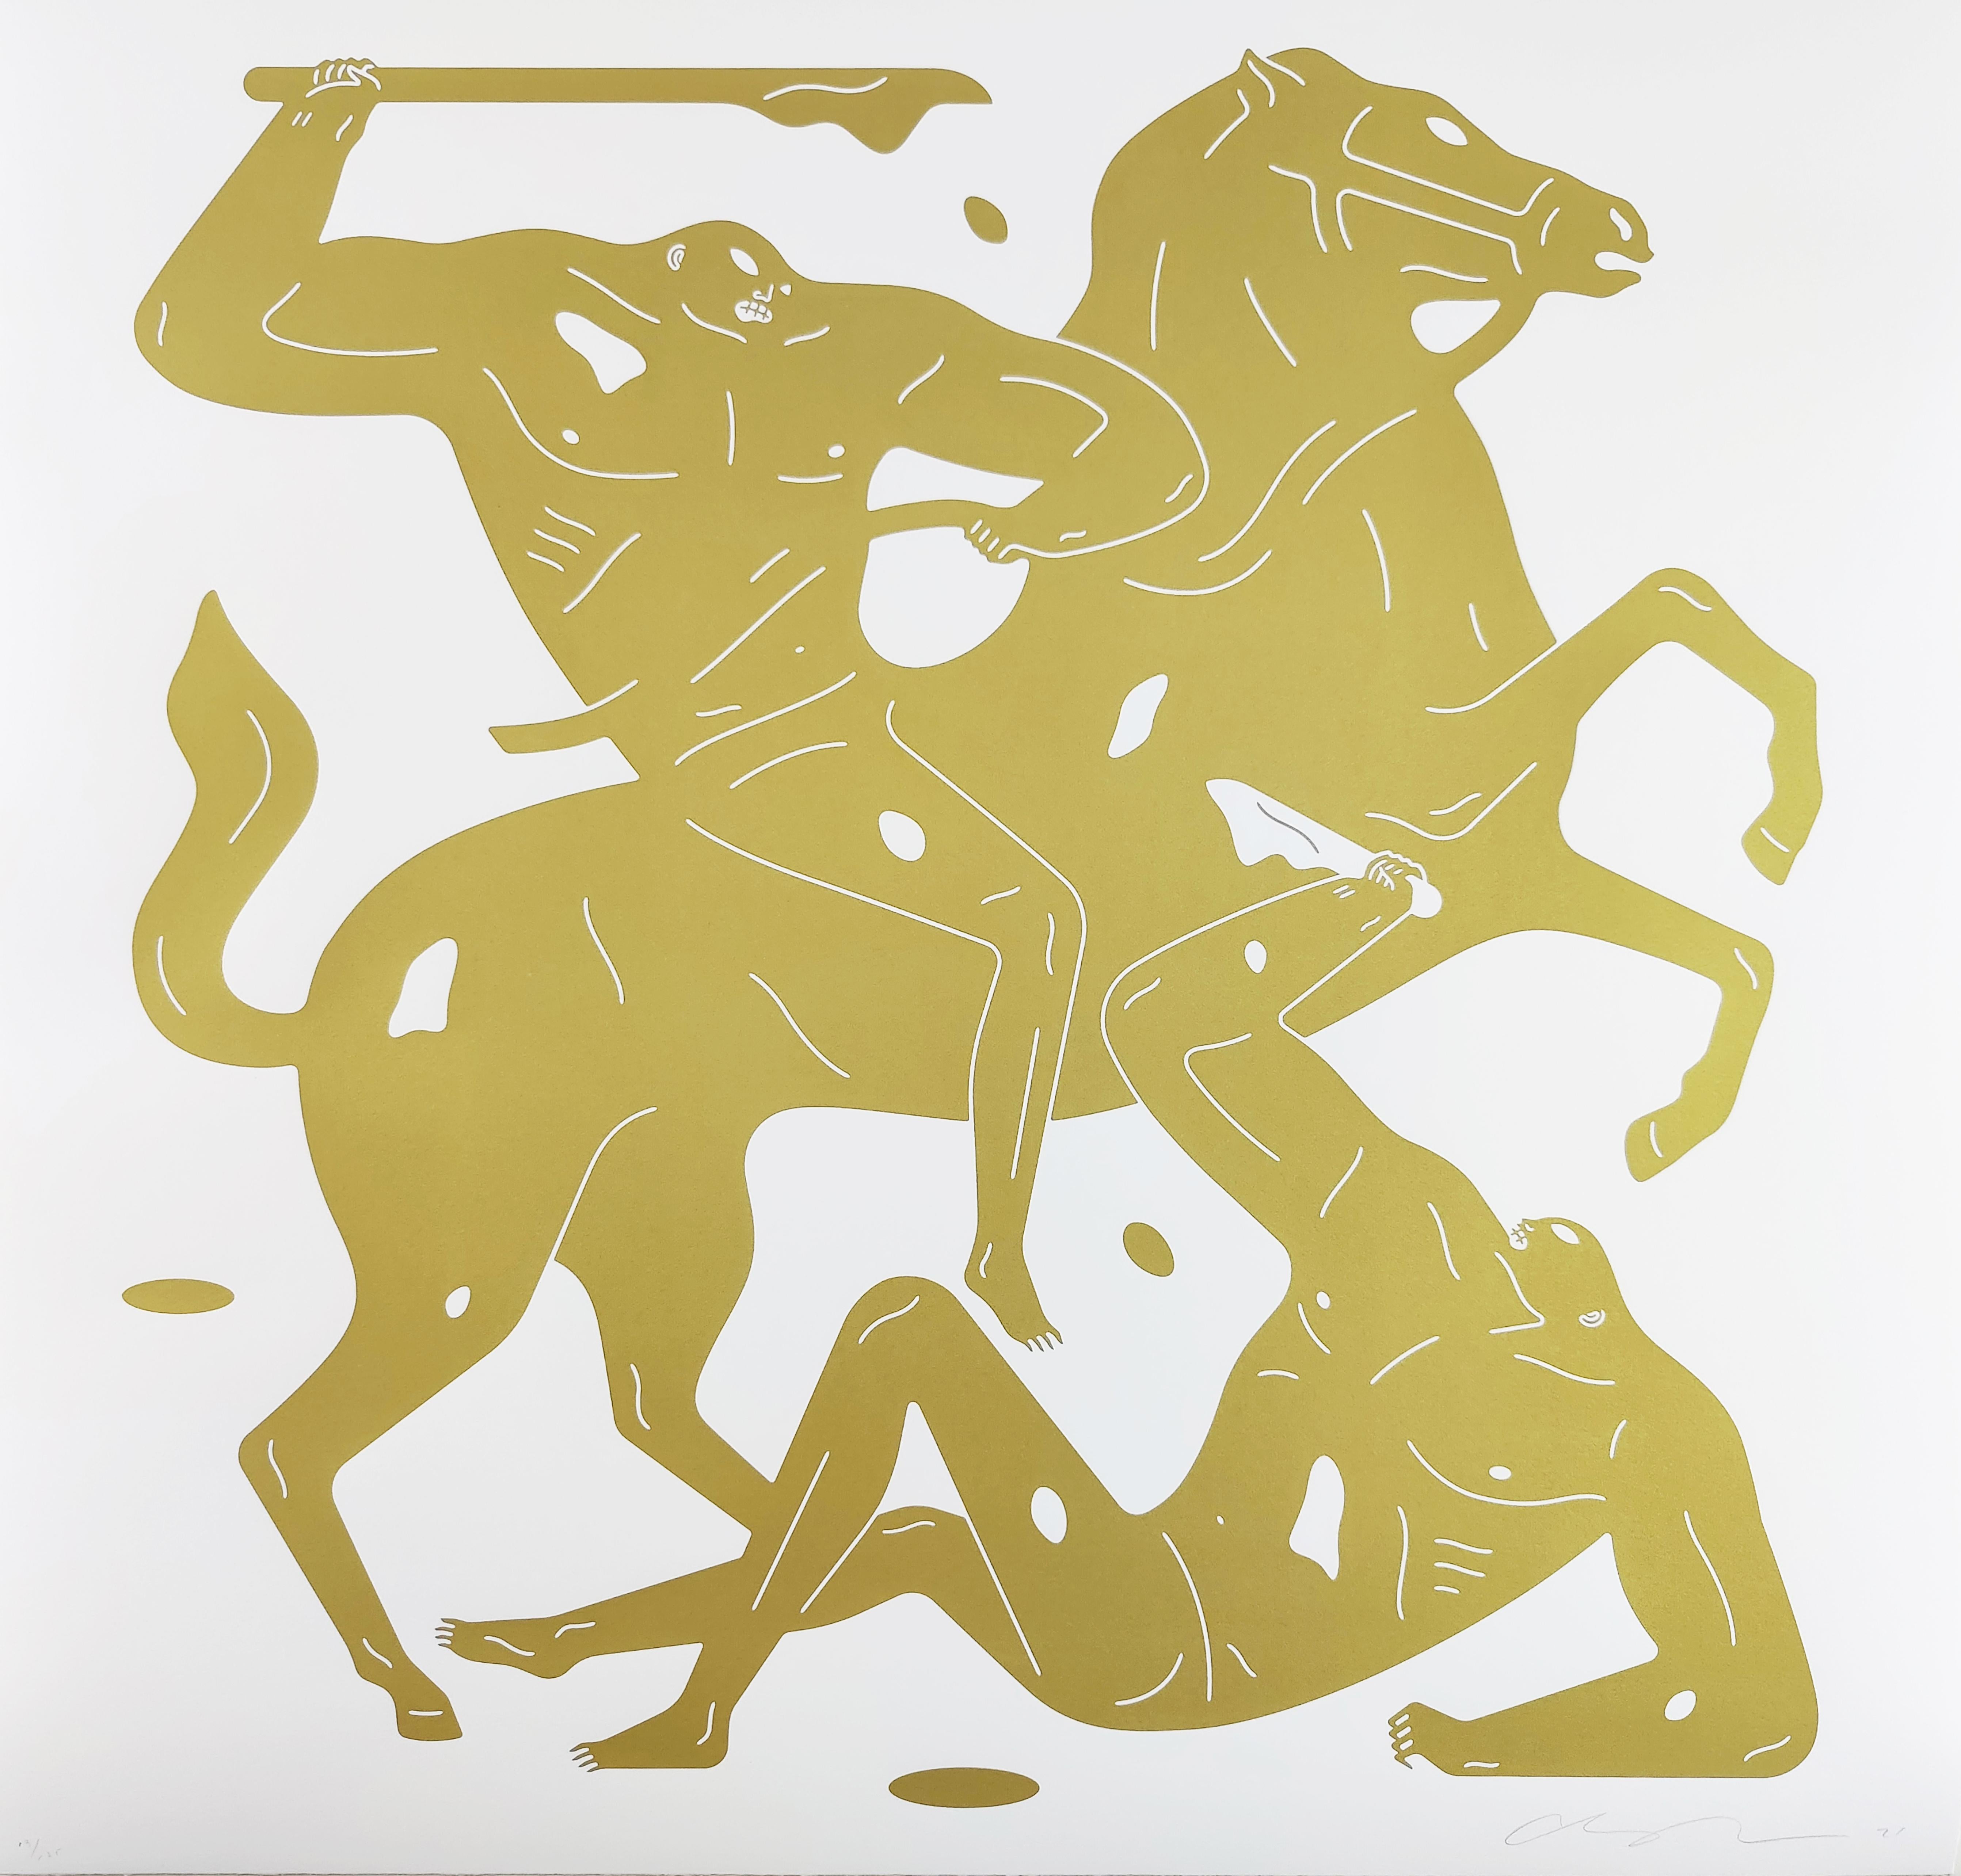 'Into the Night MMXXI' by Cleon Peterson, 2021, (Gold)
32 x 32 Inches Hand-pulled screen print on 290gsm Coventry Rag paper with deckled edges.
Limited Edition of 125.
Signed, dated and numbered by the artist.

Cleon Peterson is an LA based artist